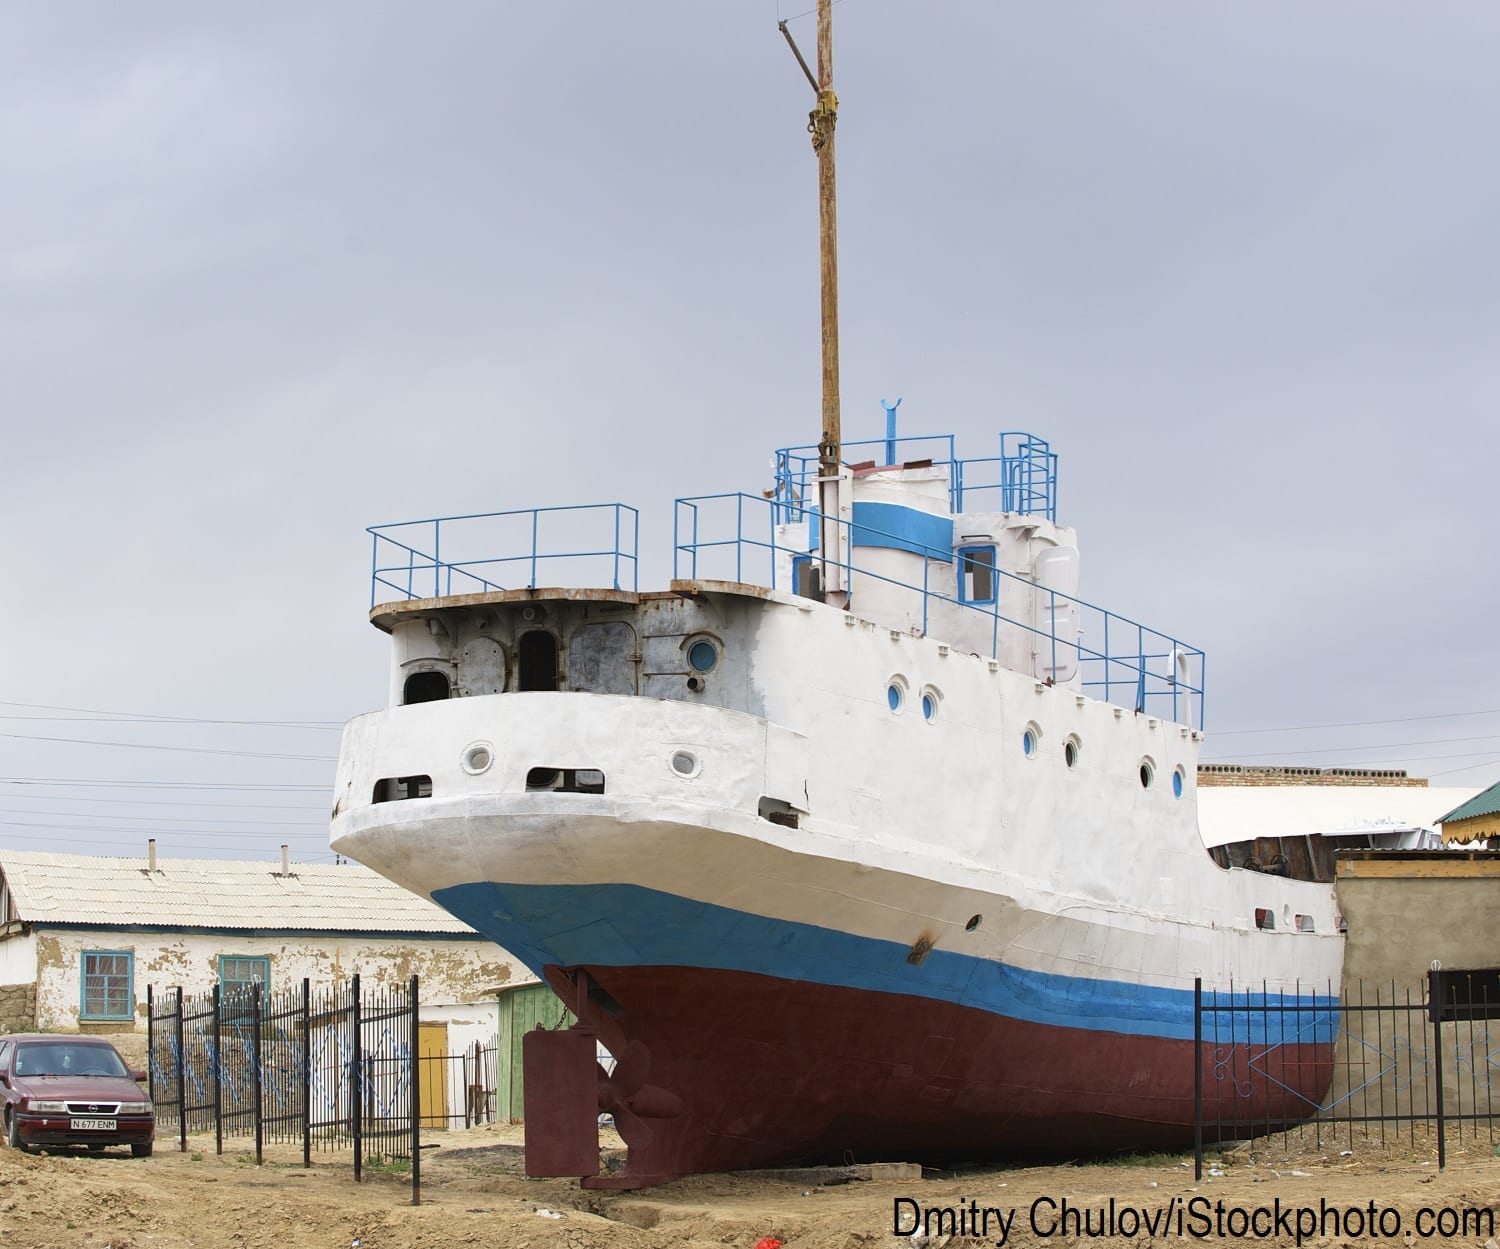 A fishing boat in Aralsk, Kazakhstan remains on shore after no longer being proximate to the evaporating Aral Sea.